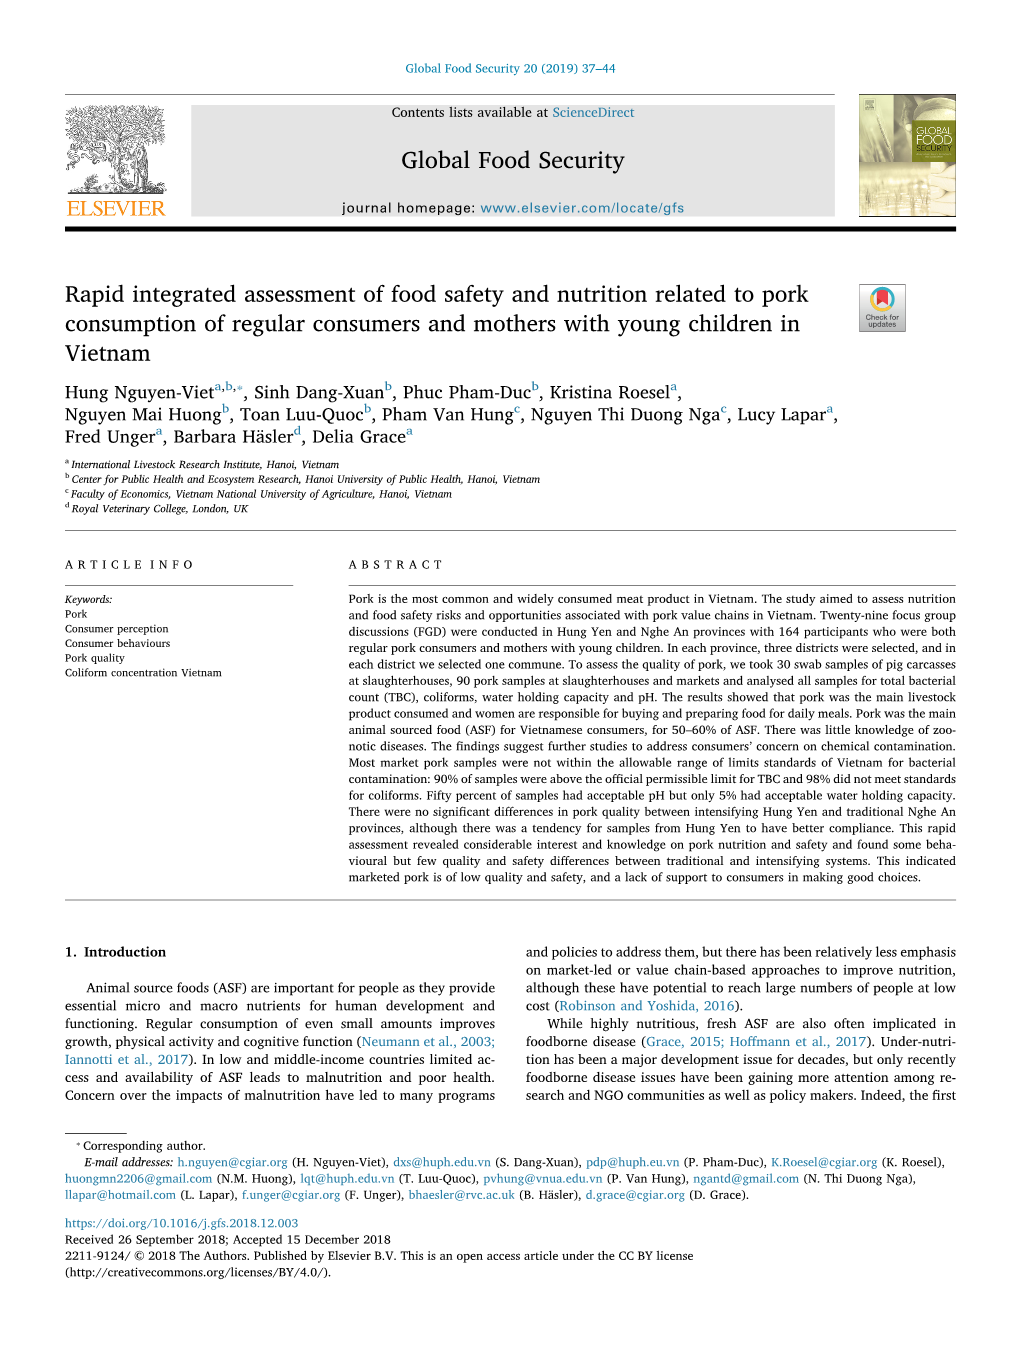 Rapid Integrated Assessment of Food Safety and Nutrition Related to Pork Consumption of Regular Consumers and Mothers with Young